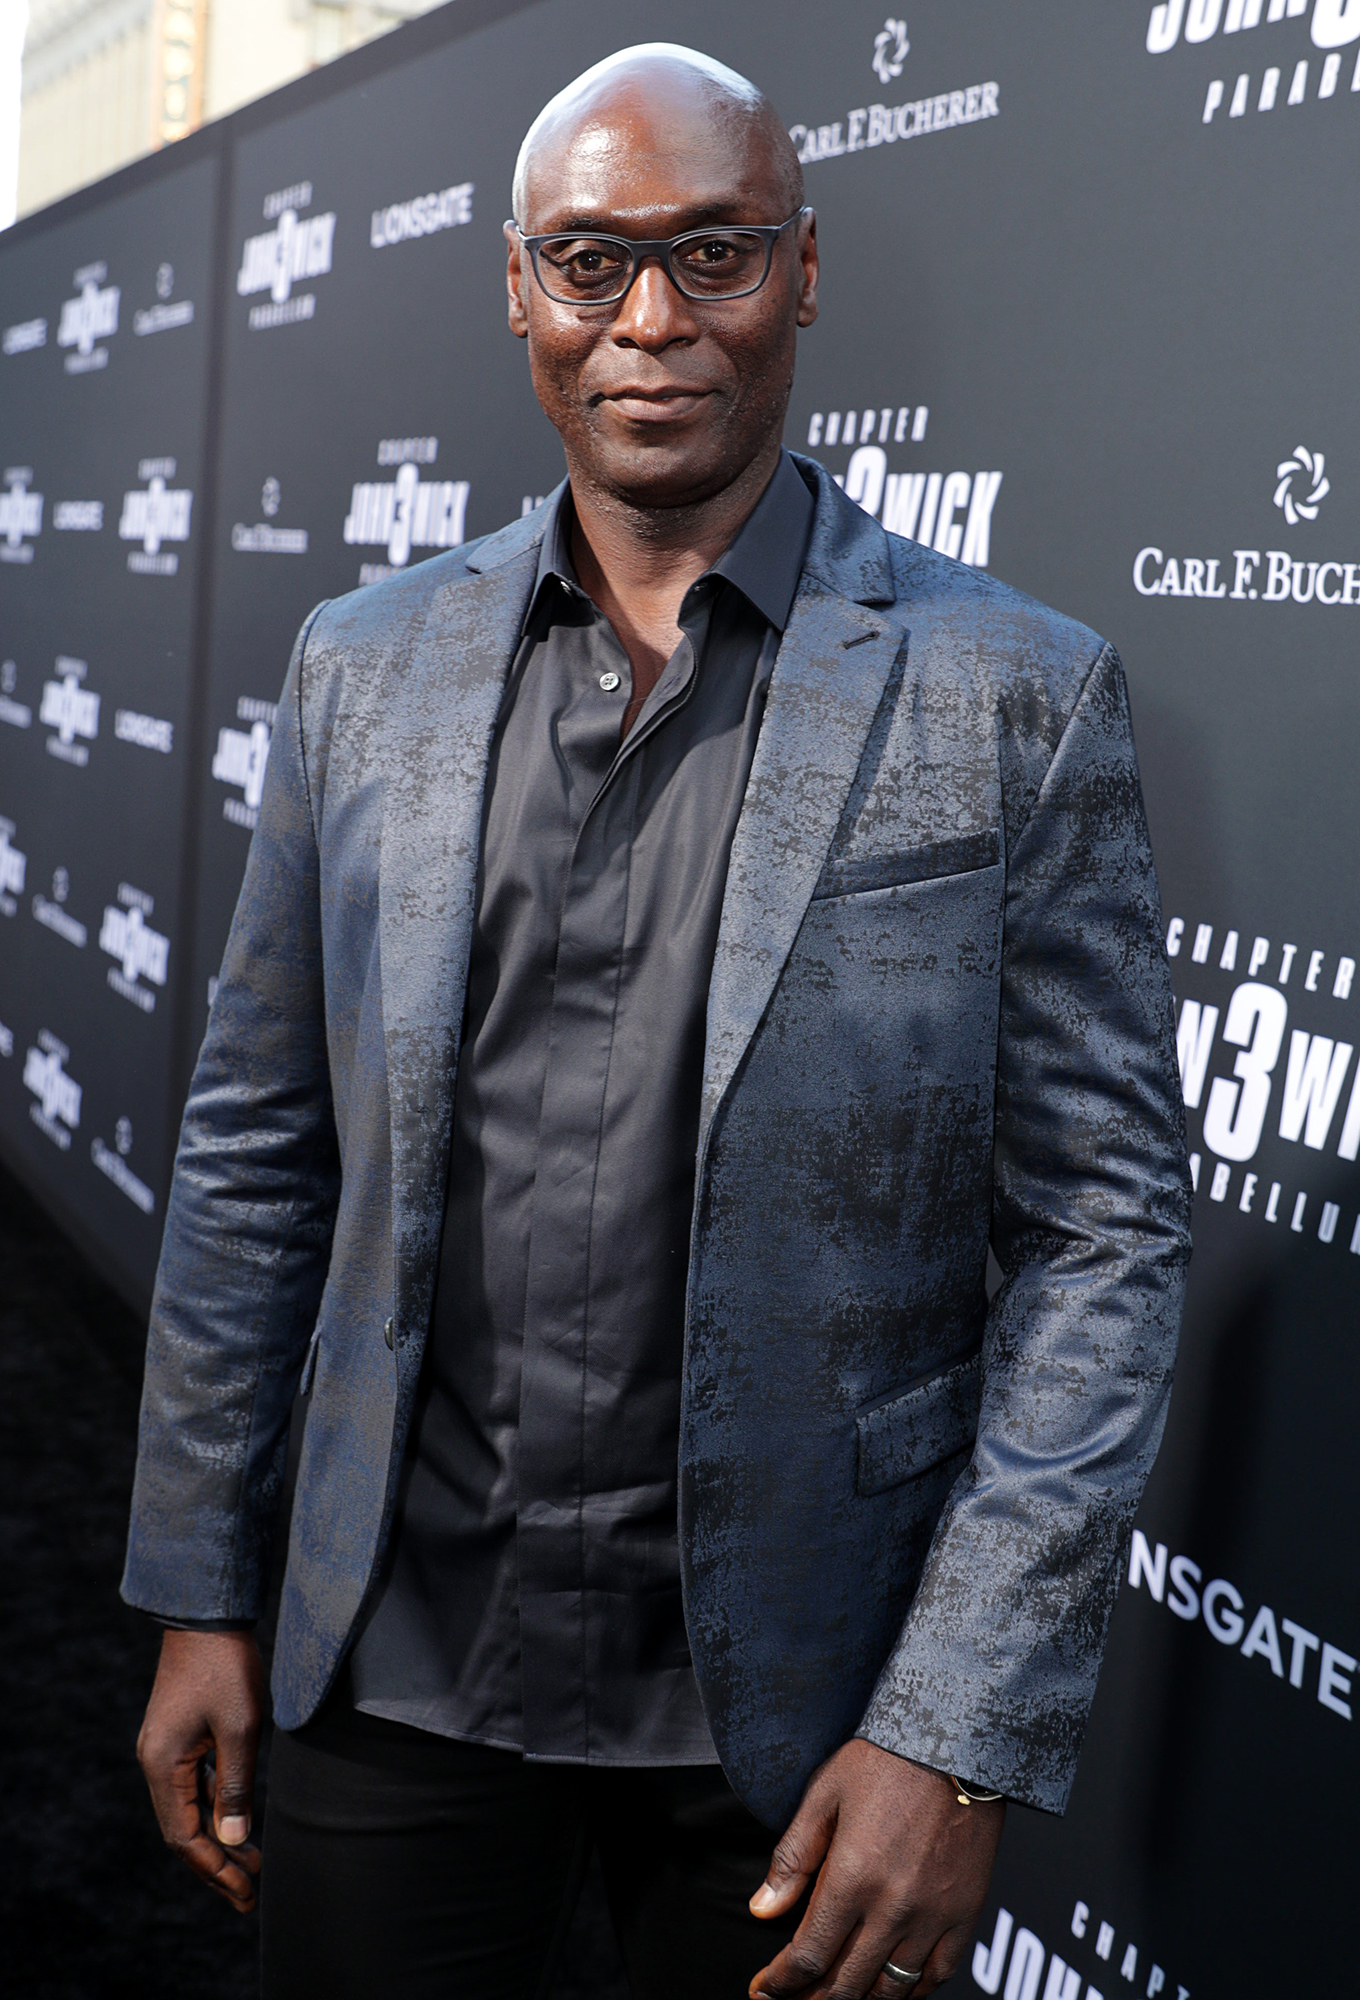 US actor Lance Reddick, 'The Wire' and 'John Wick' star, dies at 60